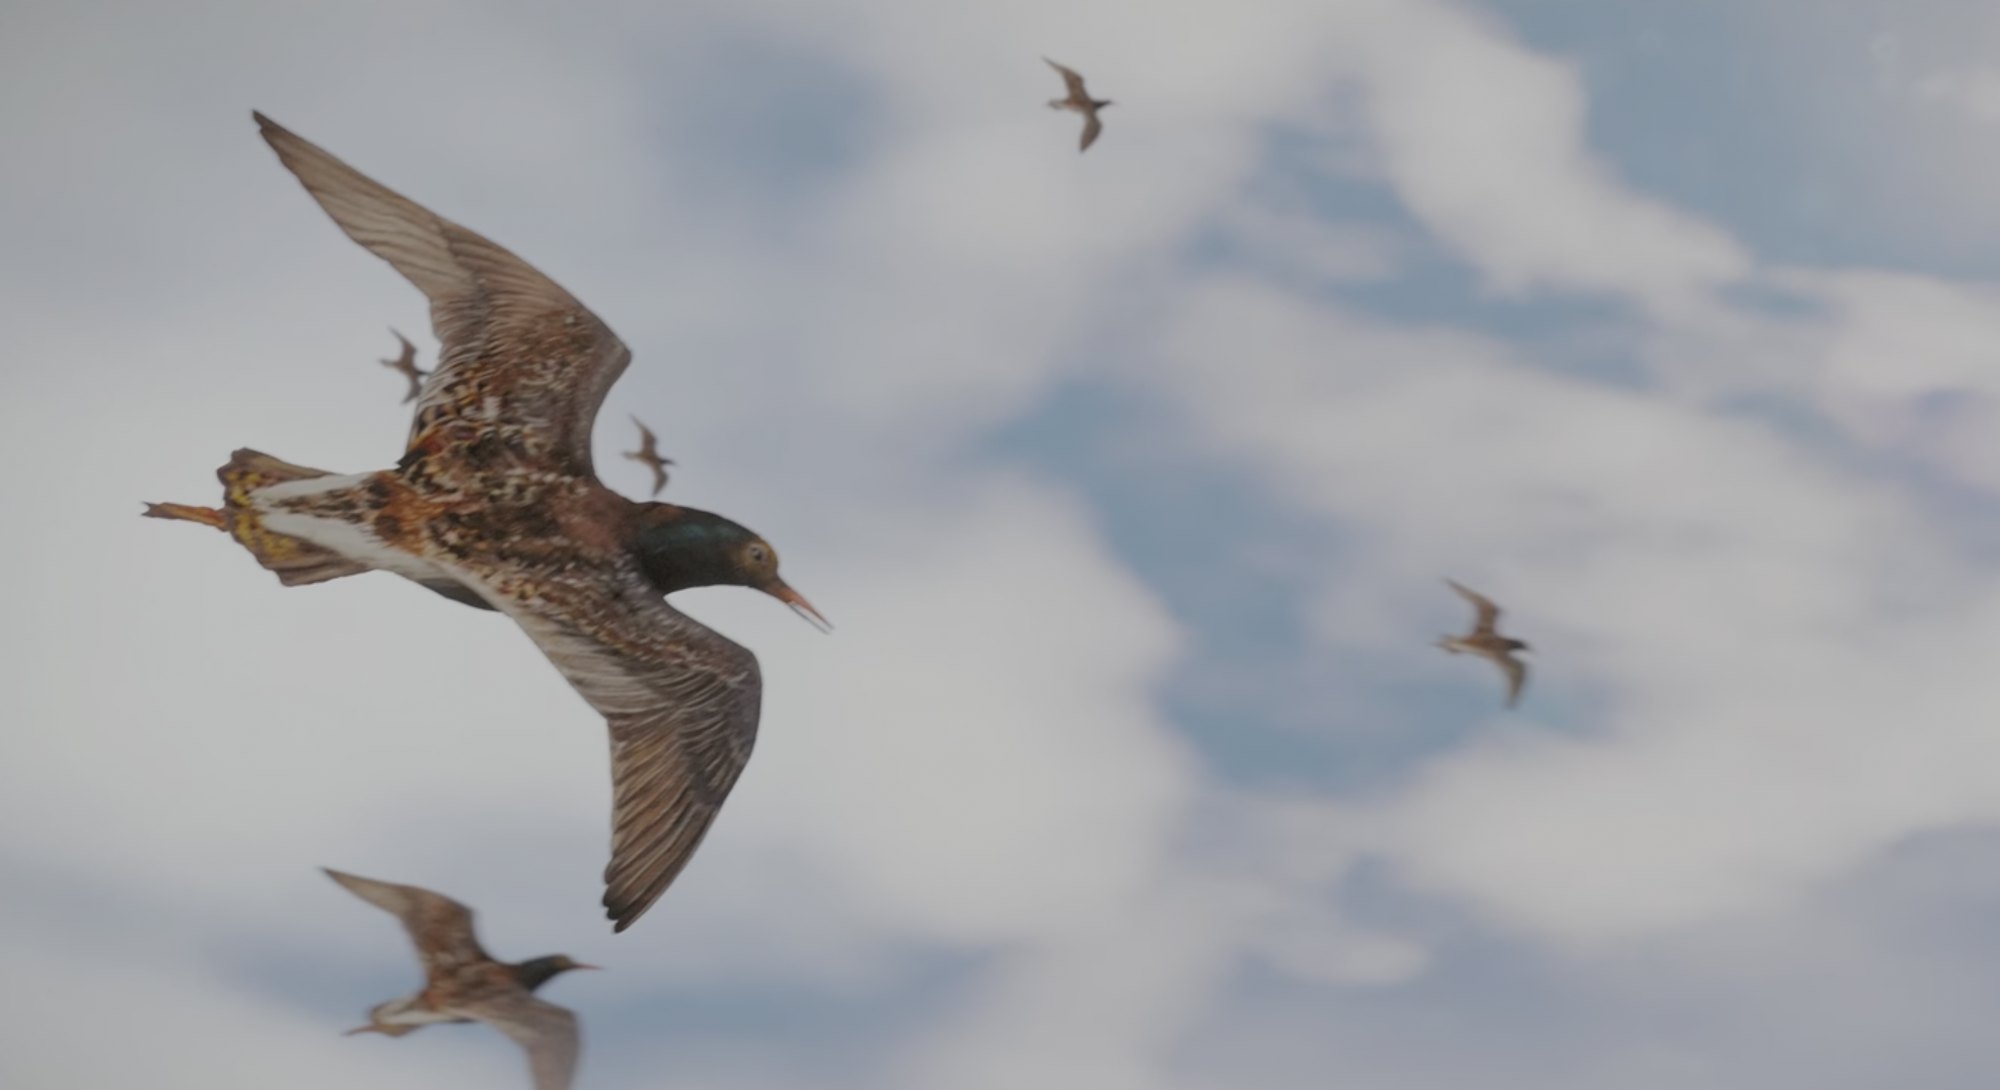 A screenshot from a trailer for the game Wingspan, showing a group of birds flying against a blue sk...